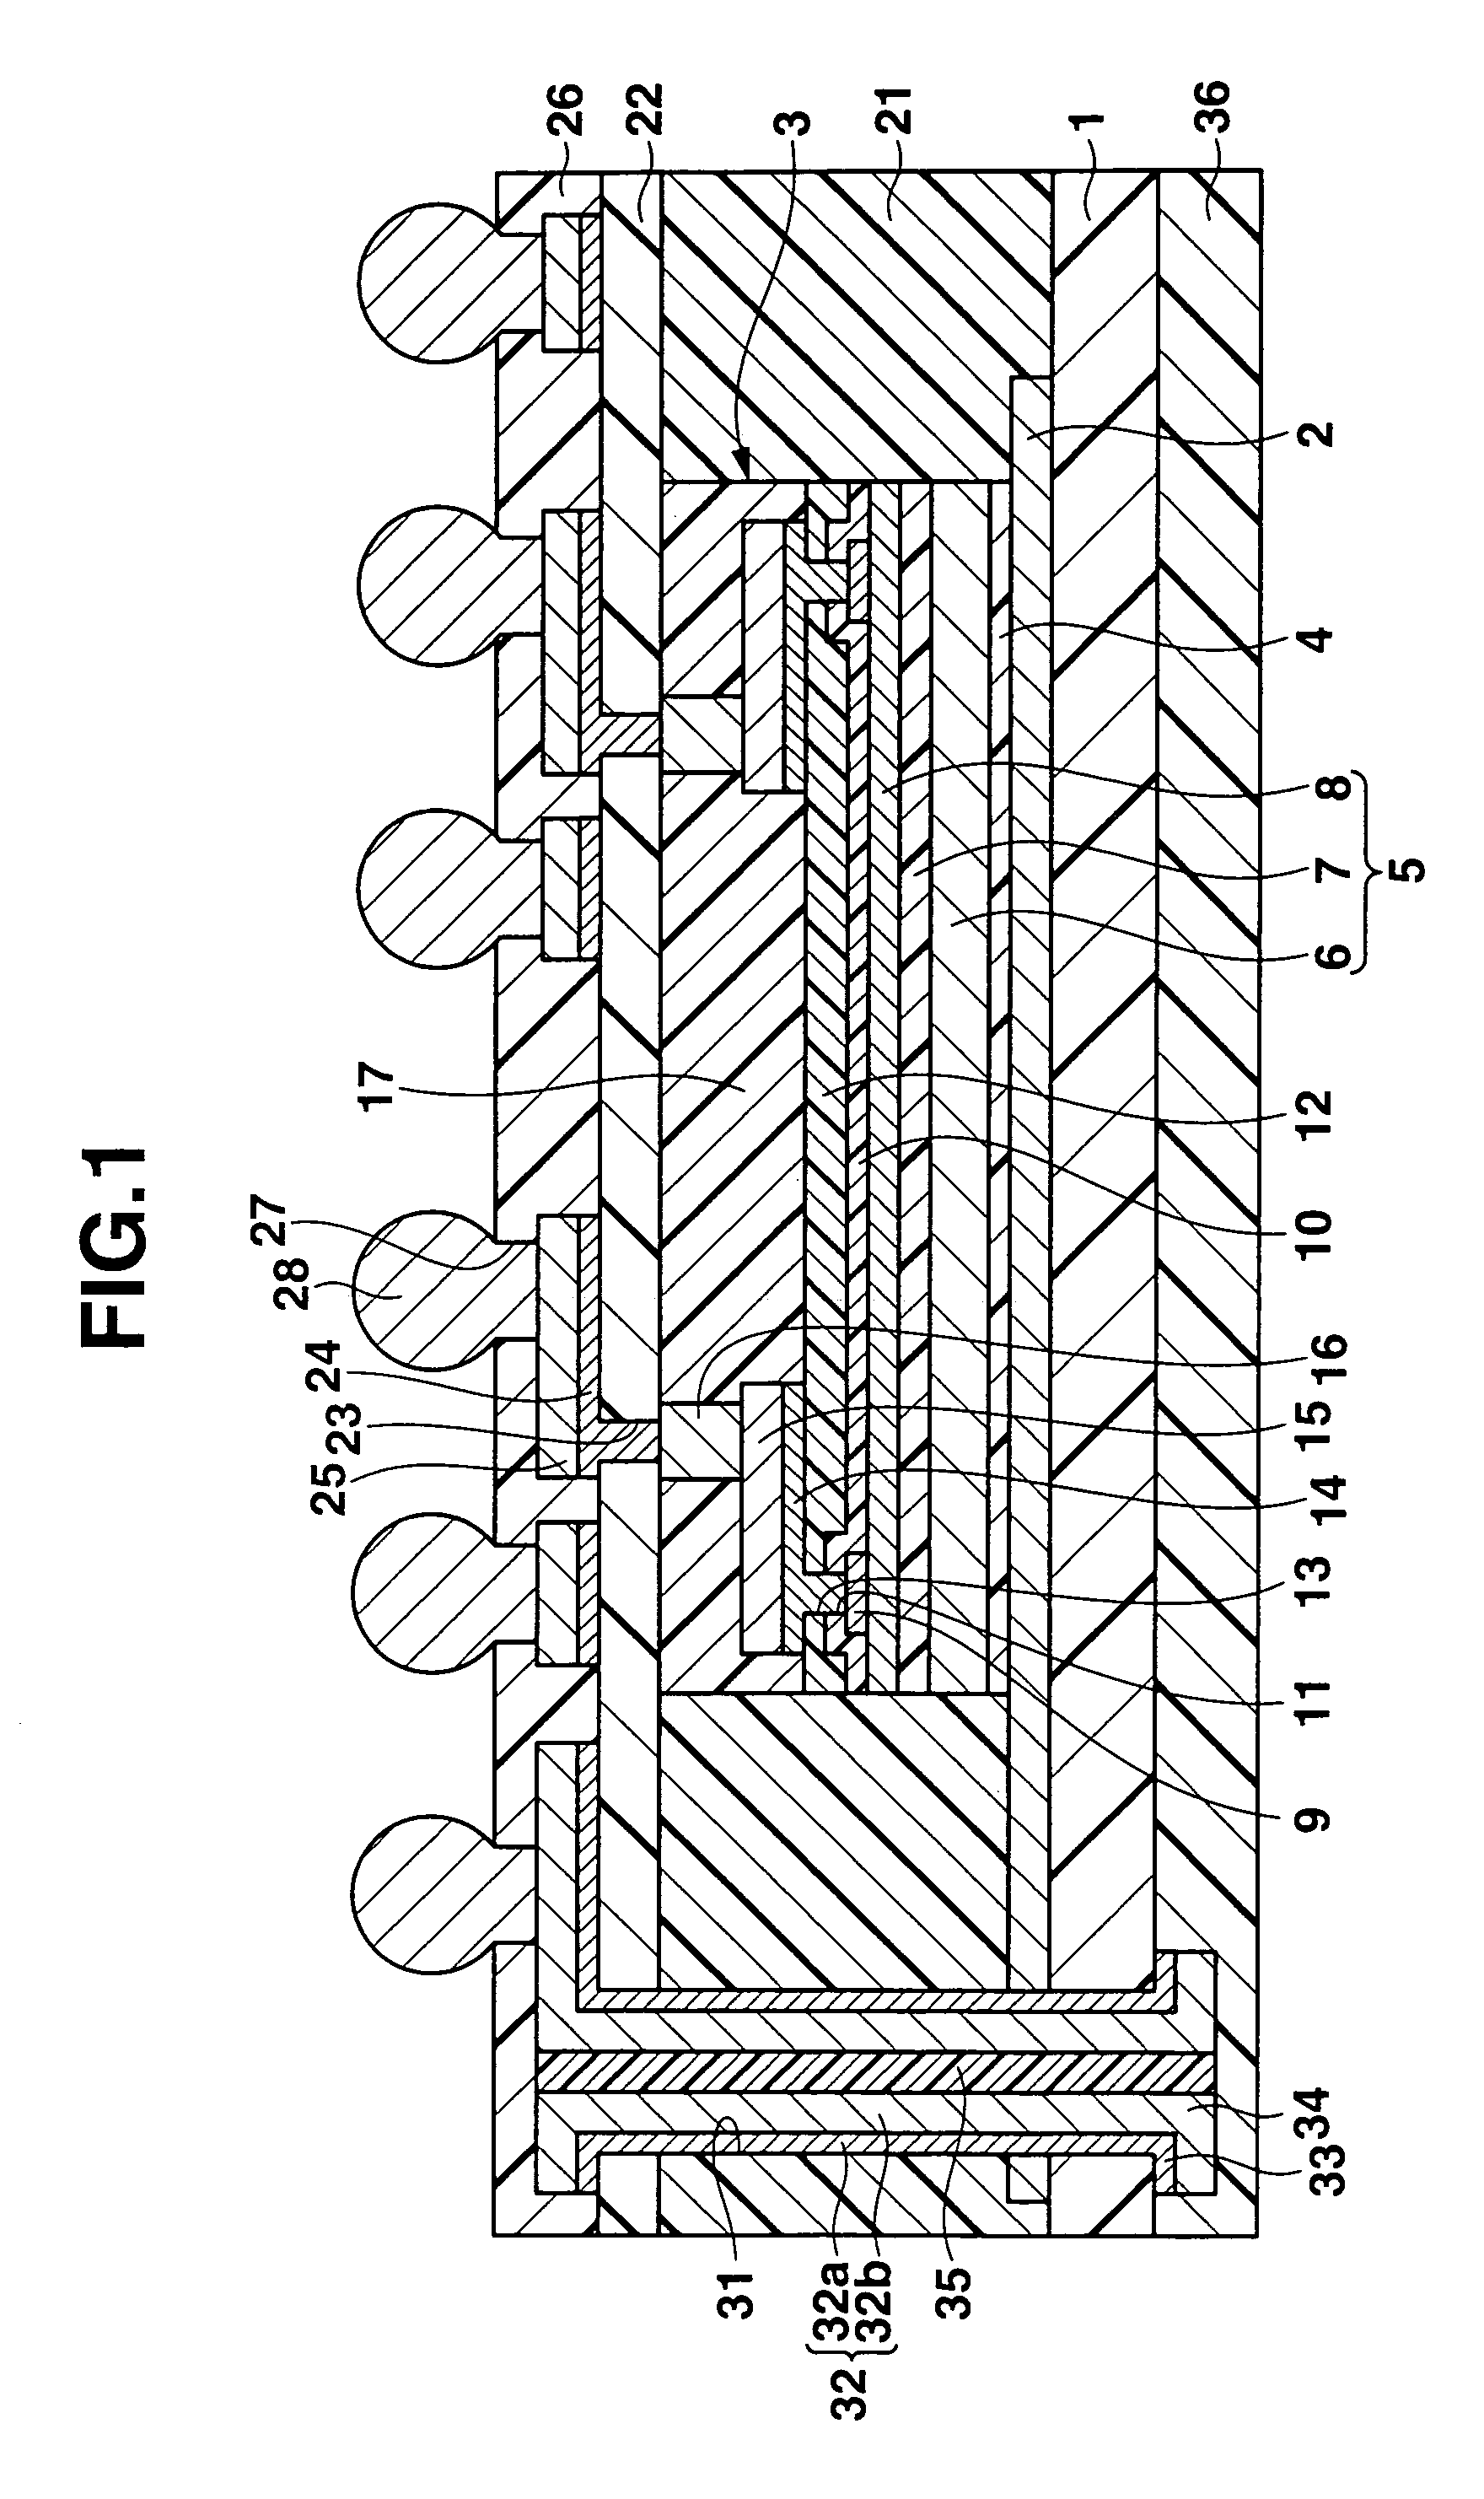 Semiconductor device incorporating a semiconductor constructing body and an interconnecting layer which is connected to a ground layer via a vertical conducting portion